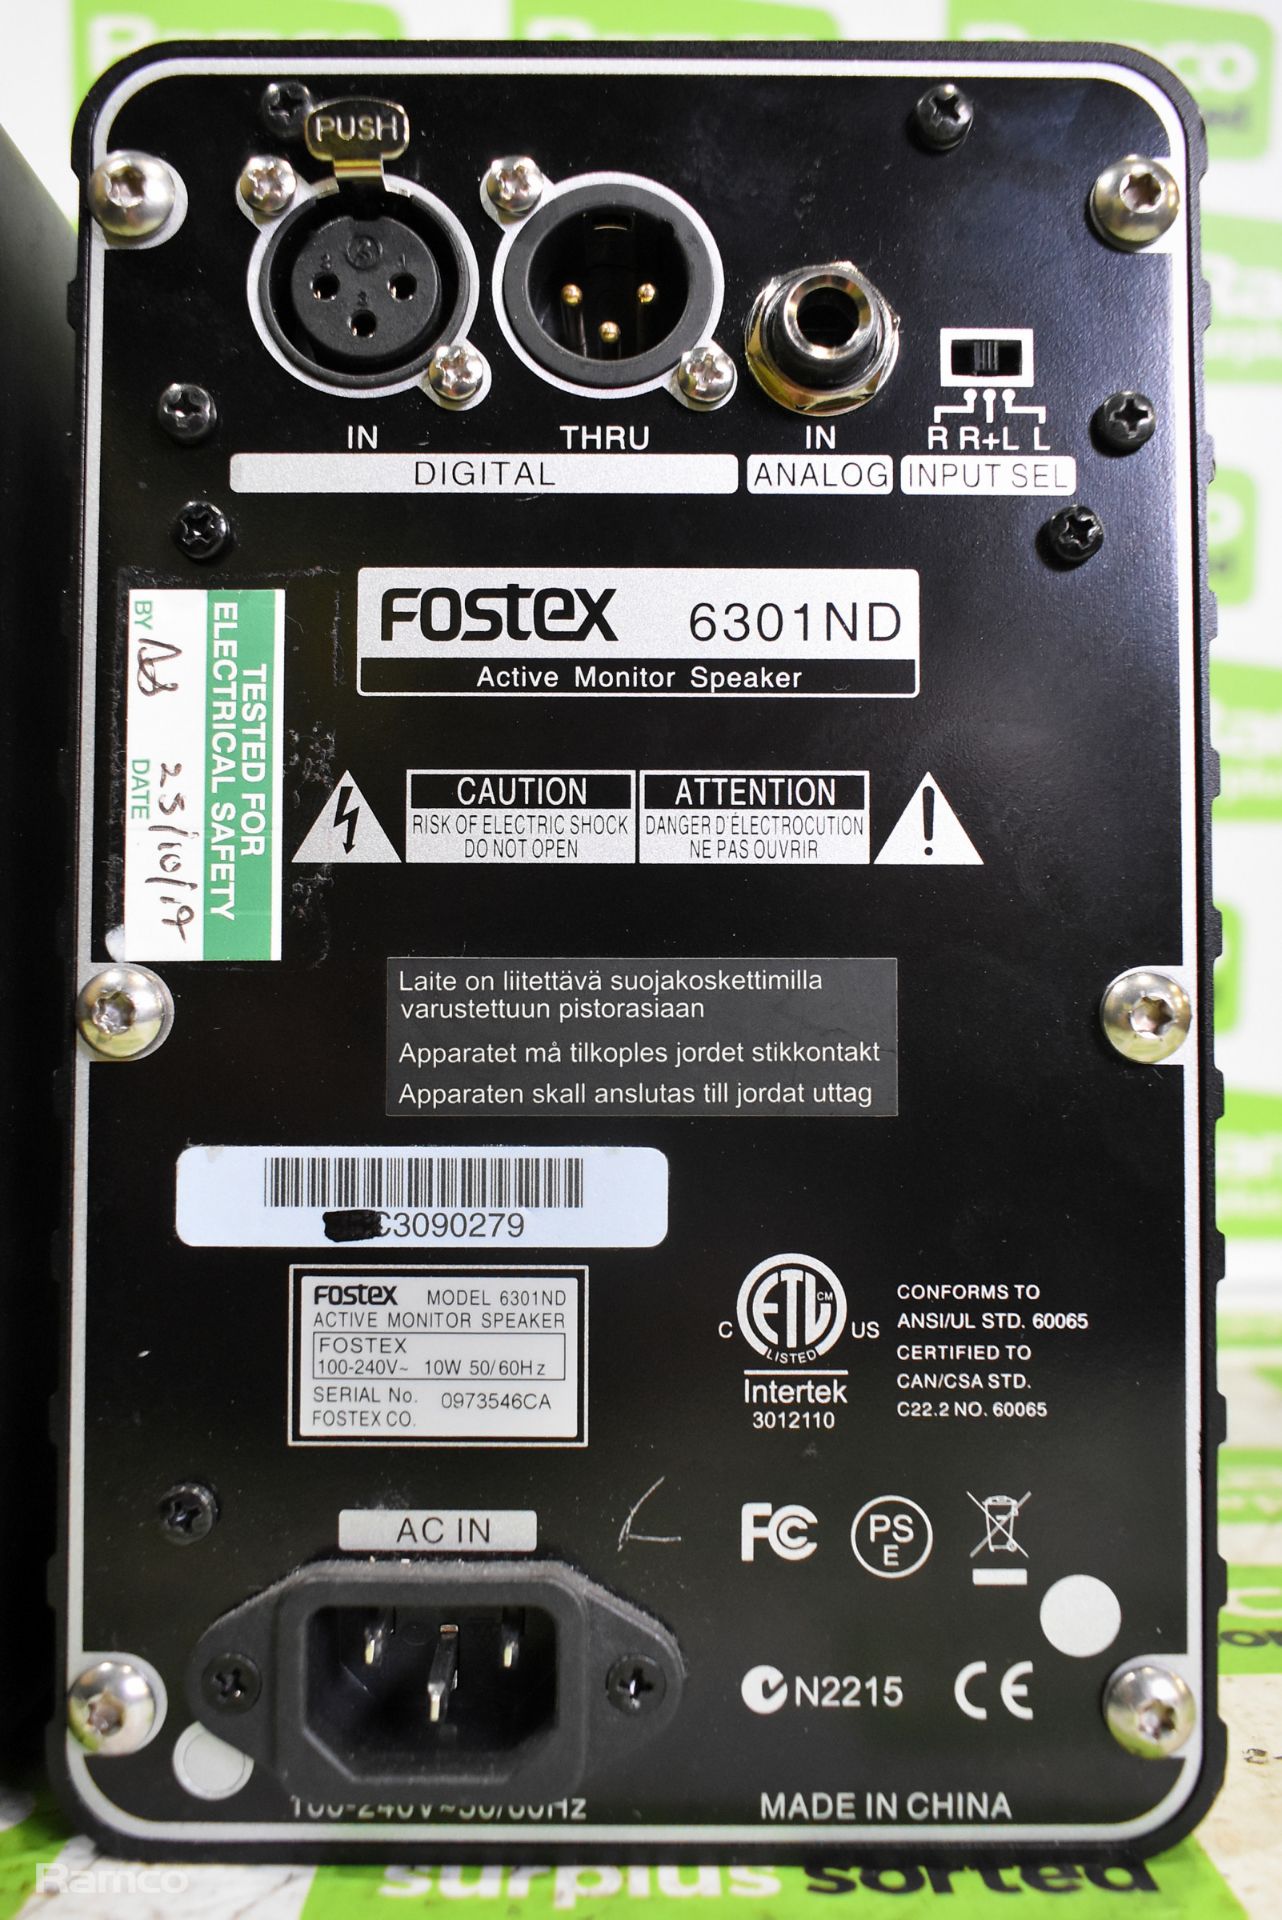 Fostex monitor speakers - full detail in description - Image 6 of 6